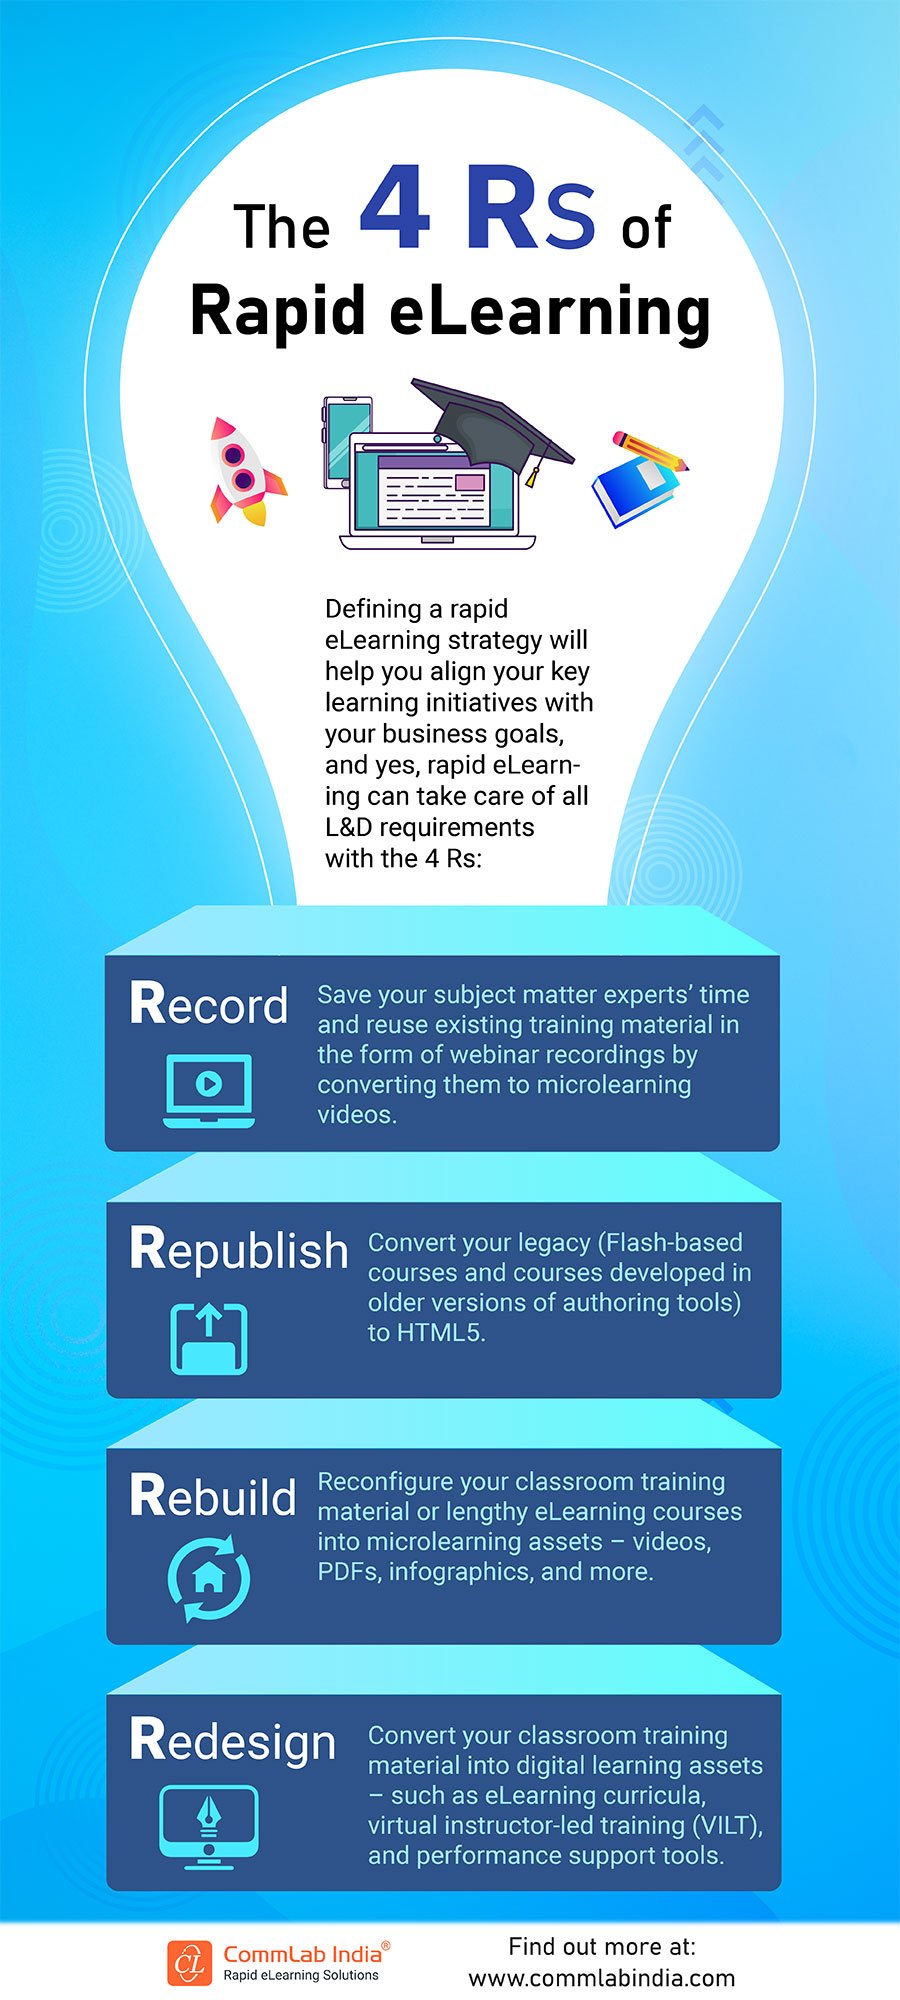 The 4 Rs of Rapid eLearning and Corporate Training